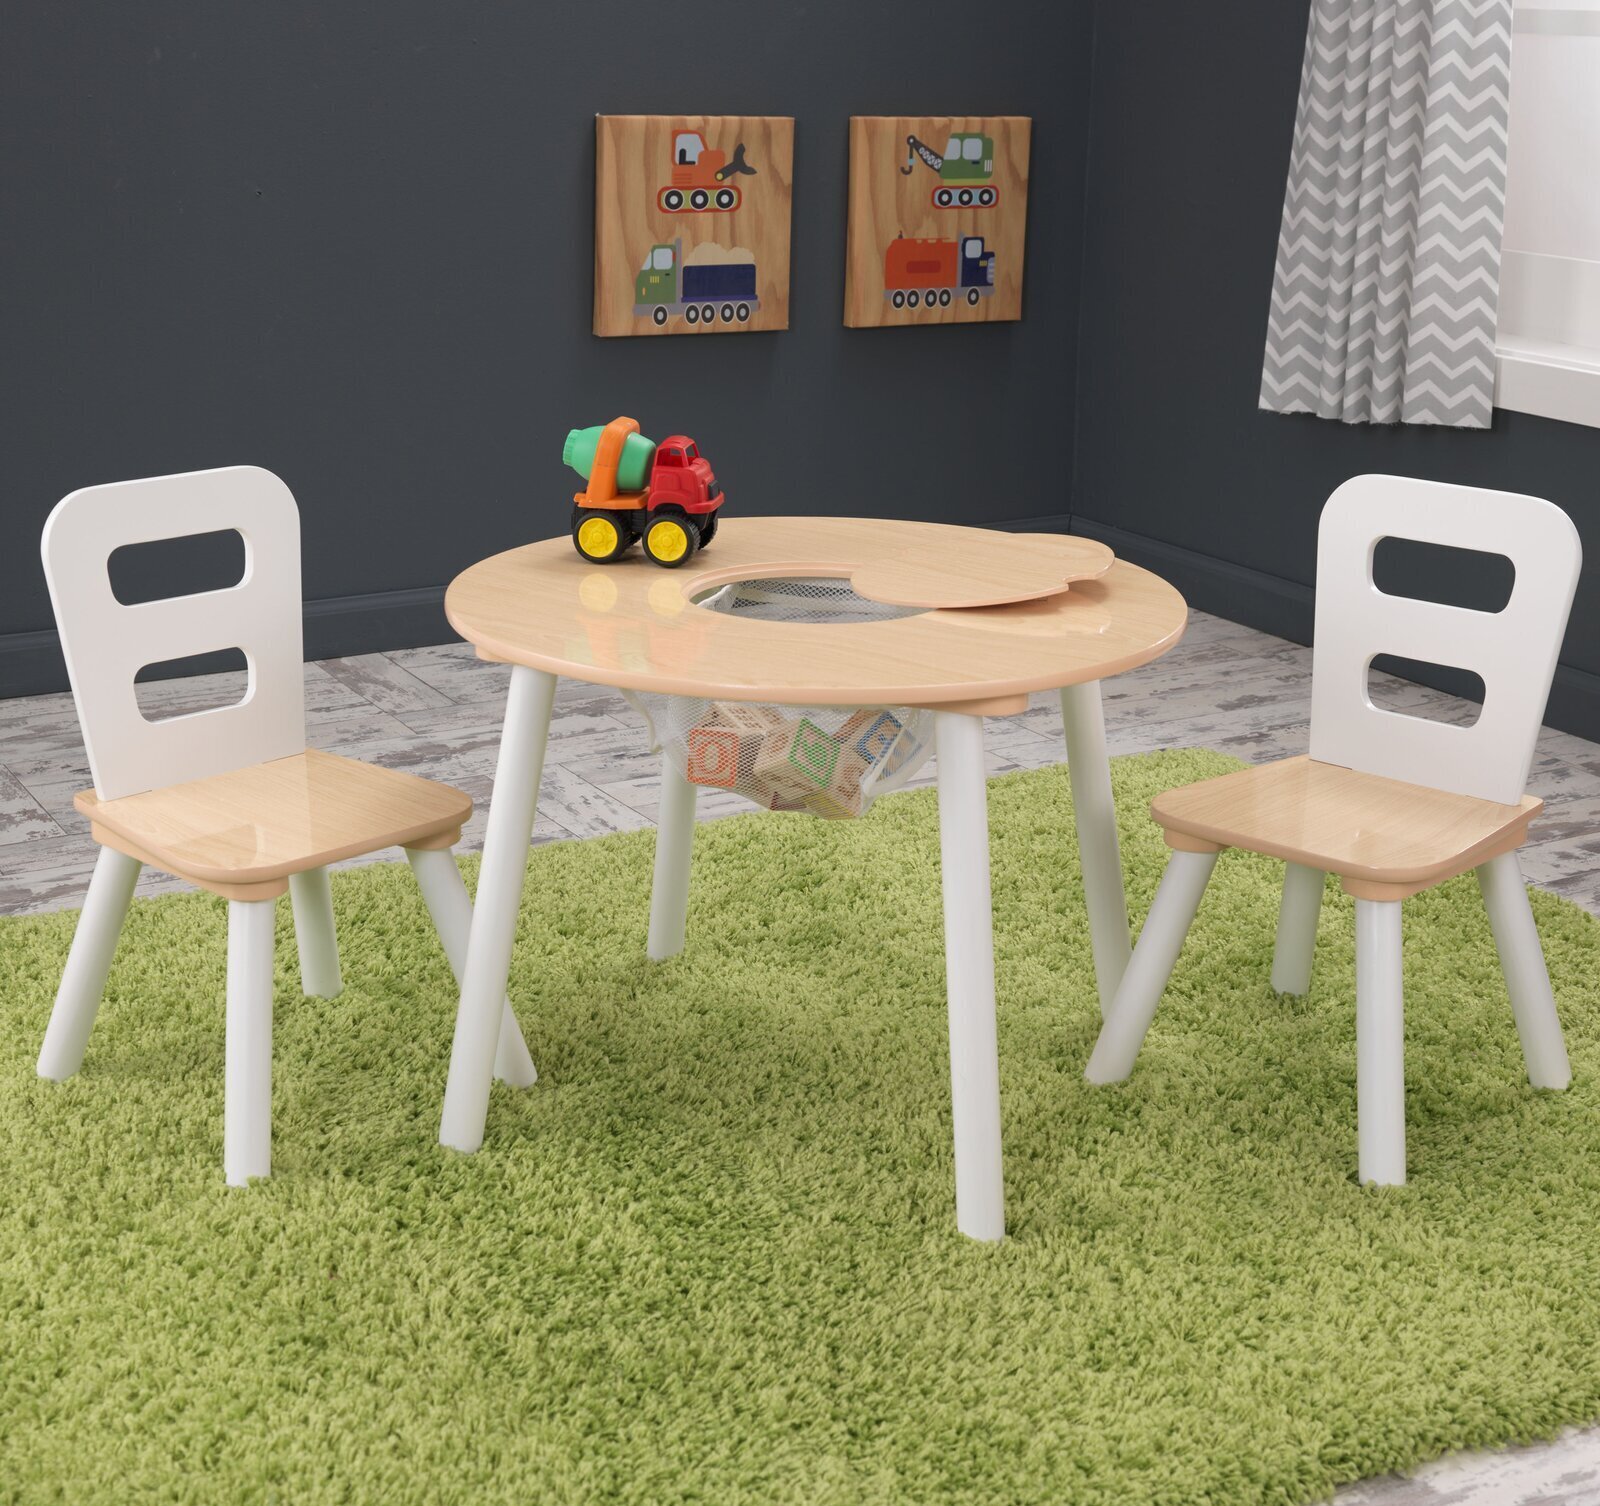 Smooth Round Kids Table for Activities